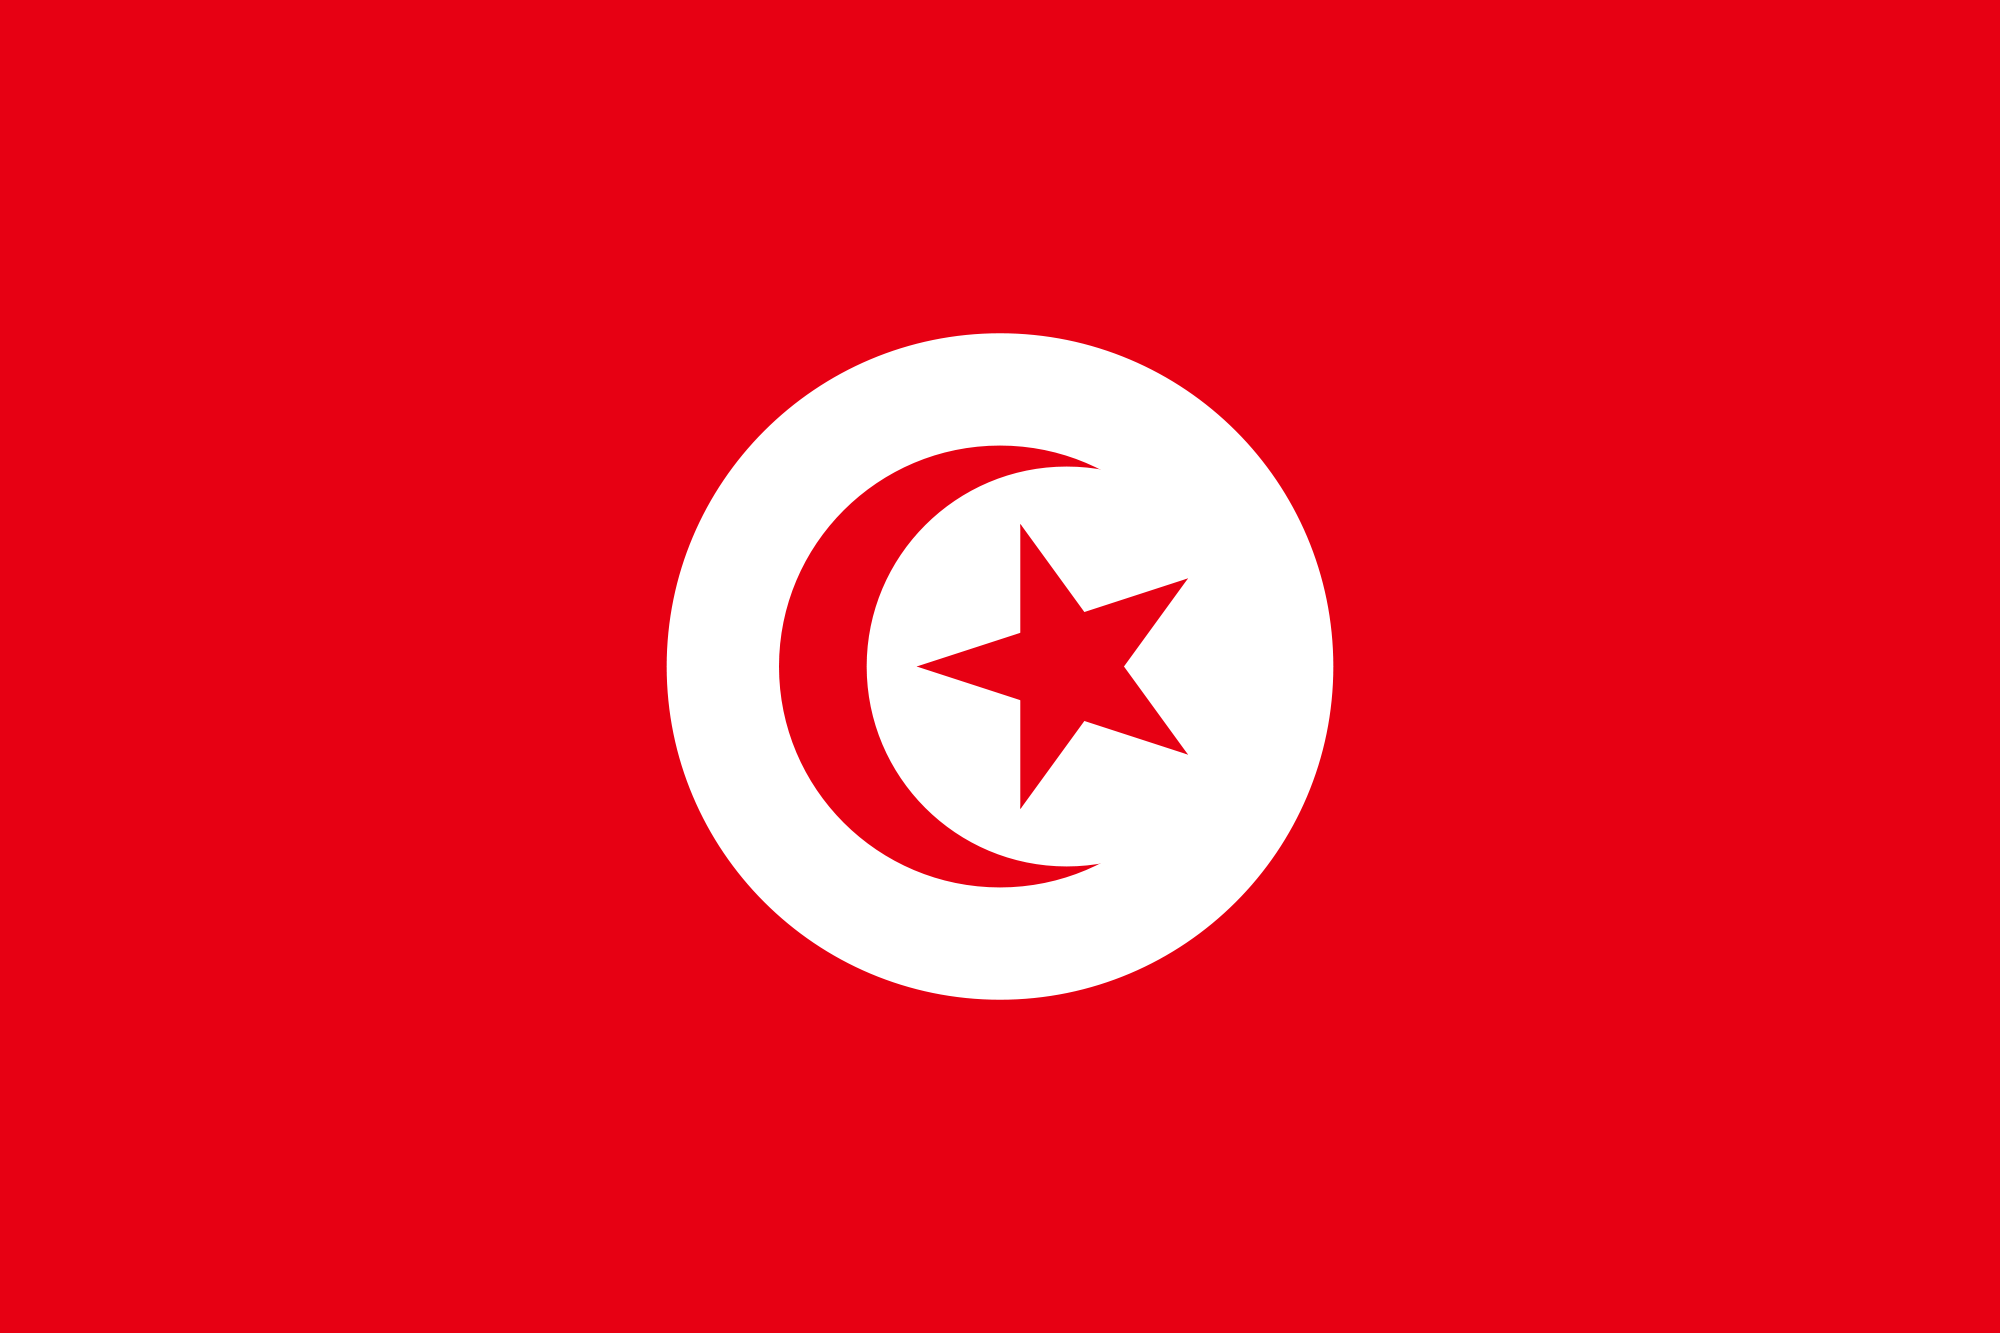 https://upload.wikimedia.org/wikipedia/commons/thumb/b/b3/Pre-1999_Flag_of_Tunisia.svg/2000px-Pre-1999_Flag_of_Tunisia.svg.png